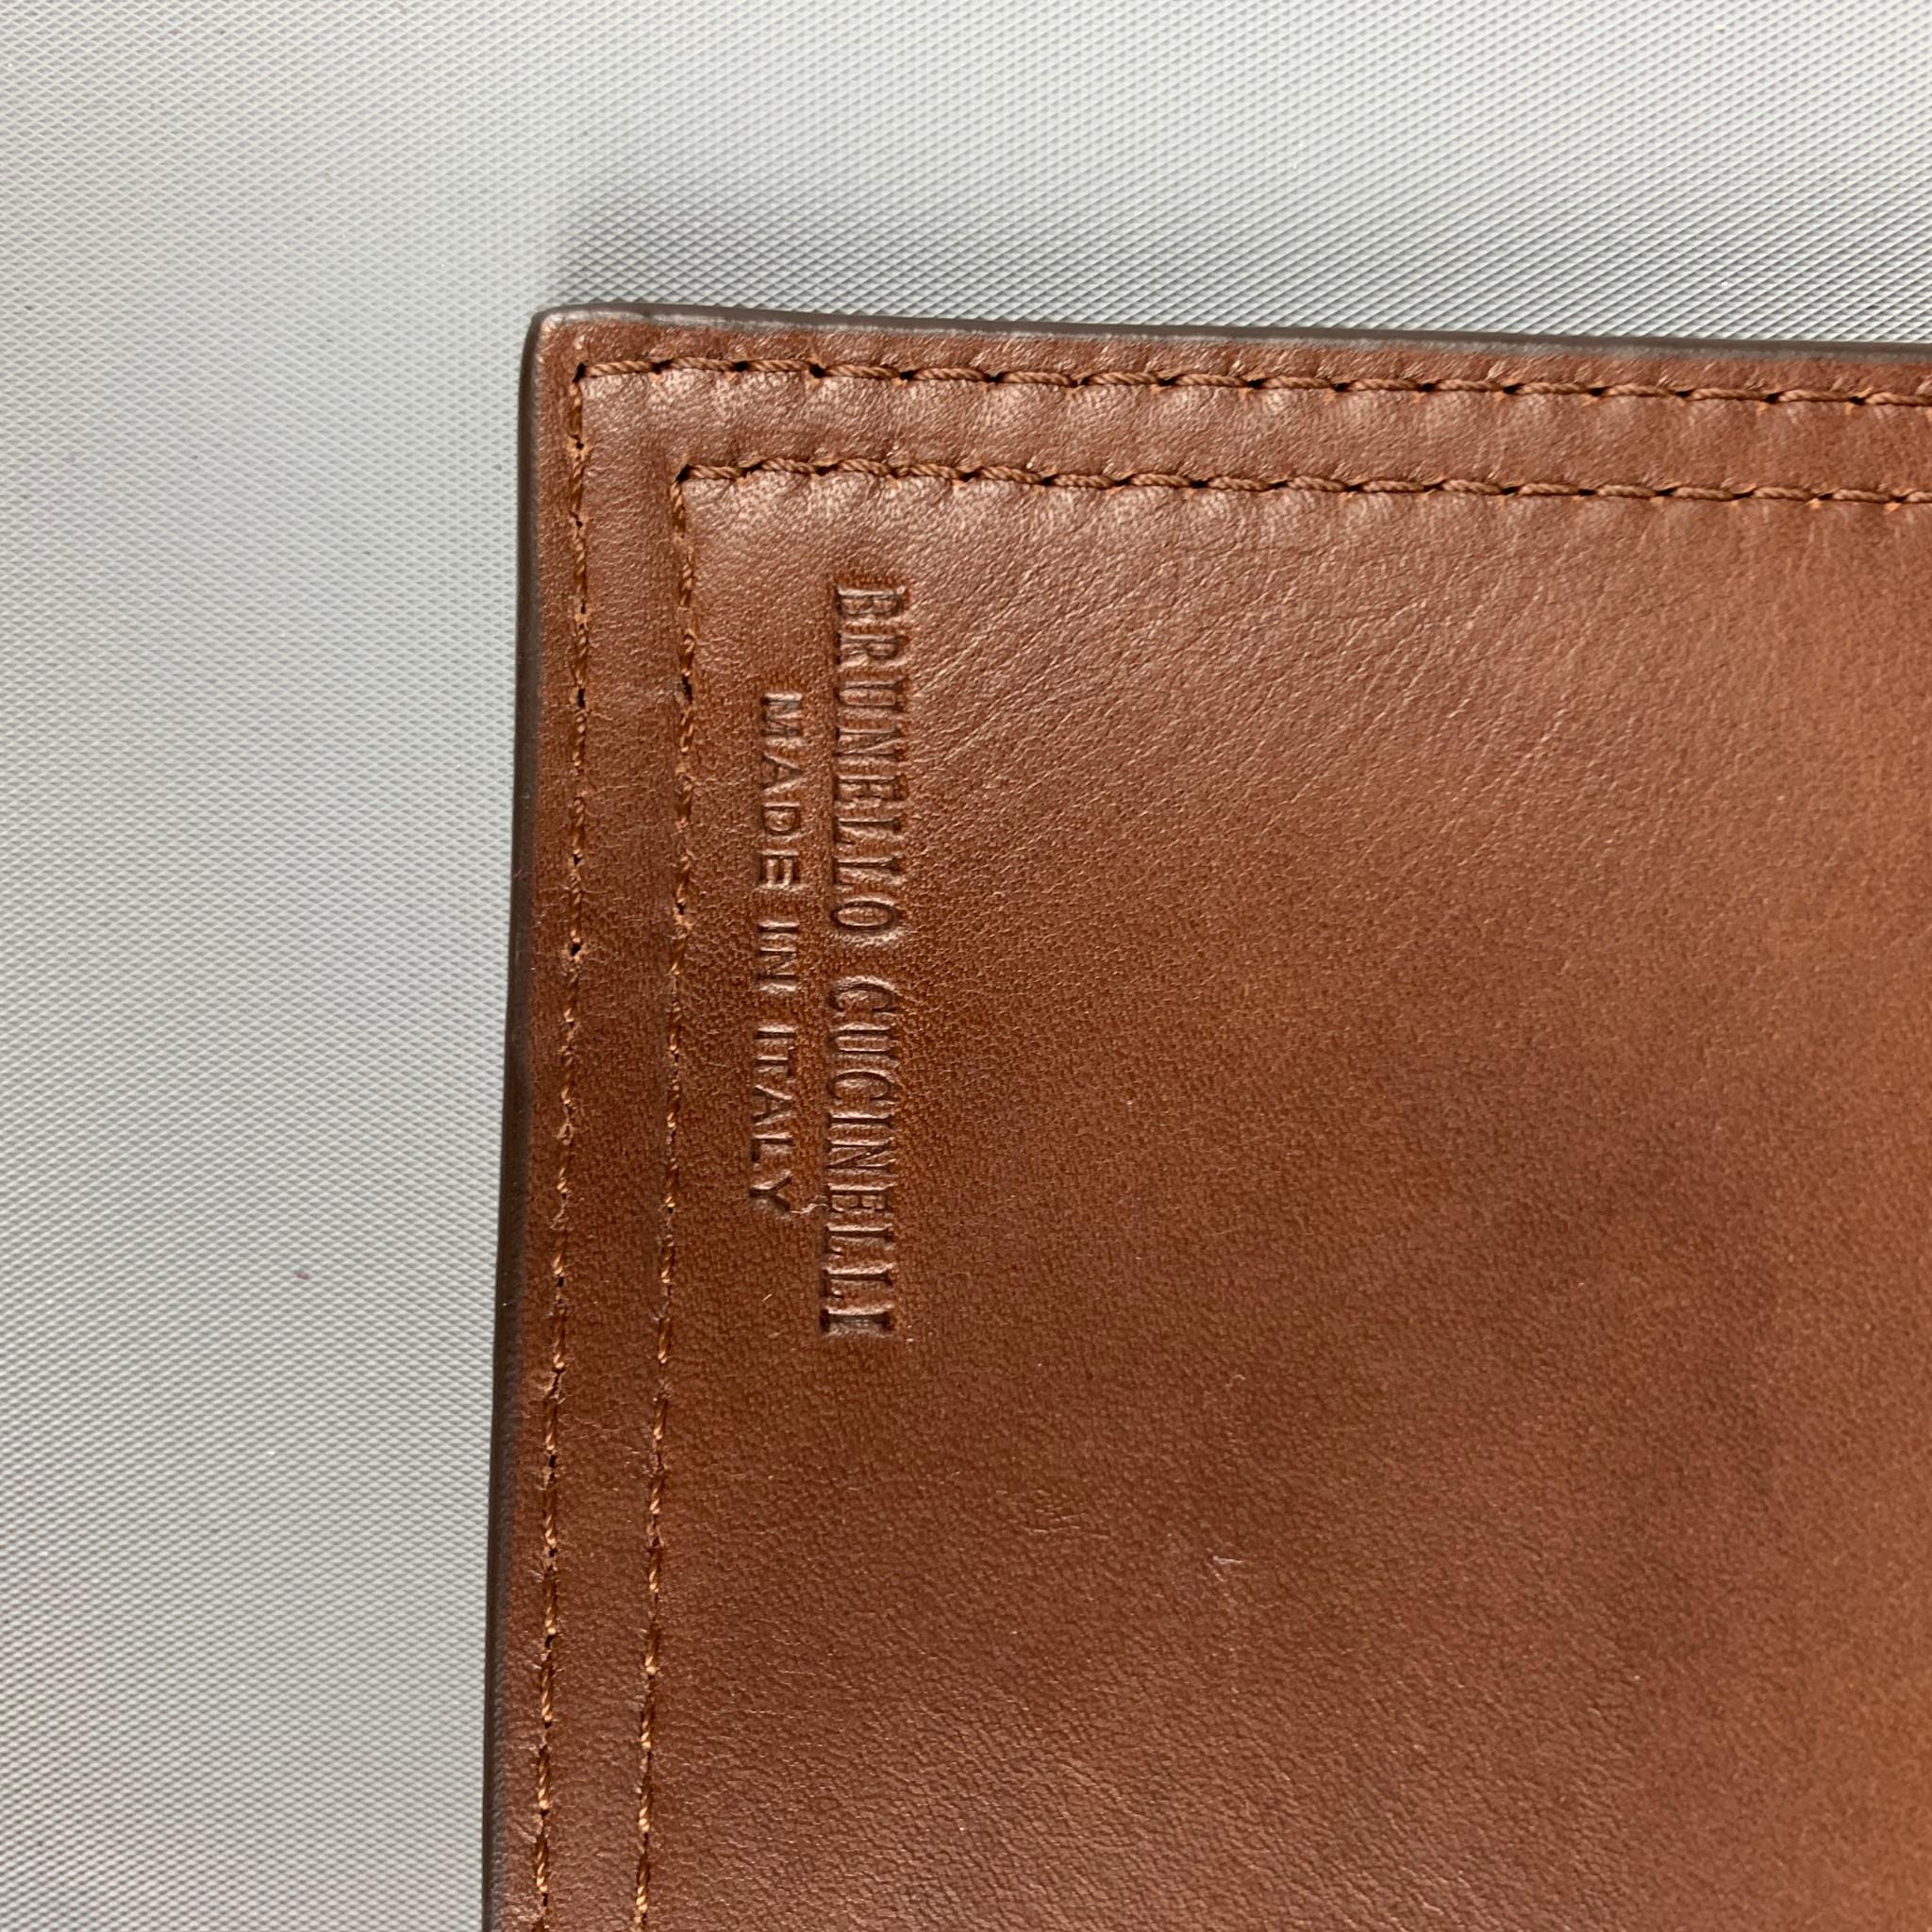 BRUNELLO iPad case comes in a brown leather featuring inner slots and a toggle turn lock closure. Made in Italy. 

Very Good Pre-Owned Condition.
Original Retail Price: $780.00

Measurements:

Length: 10 in.   
Height: 8.5 in.